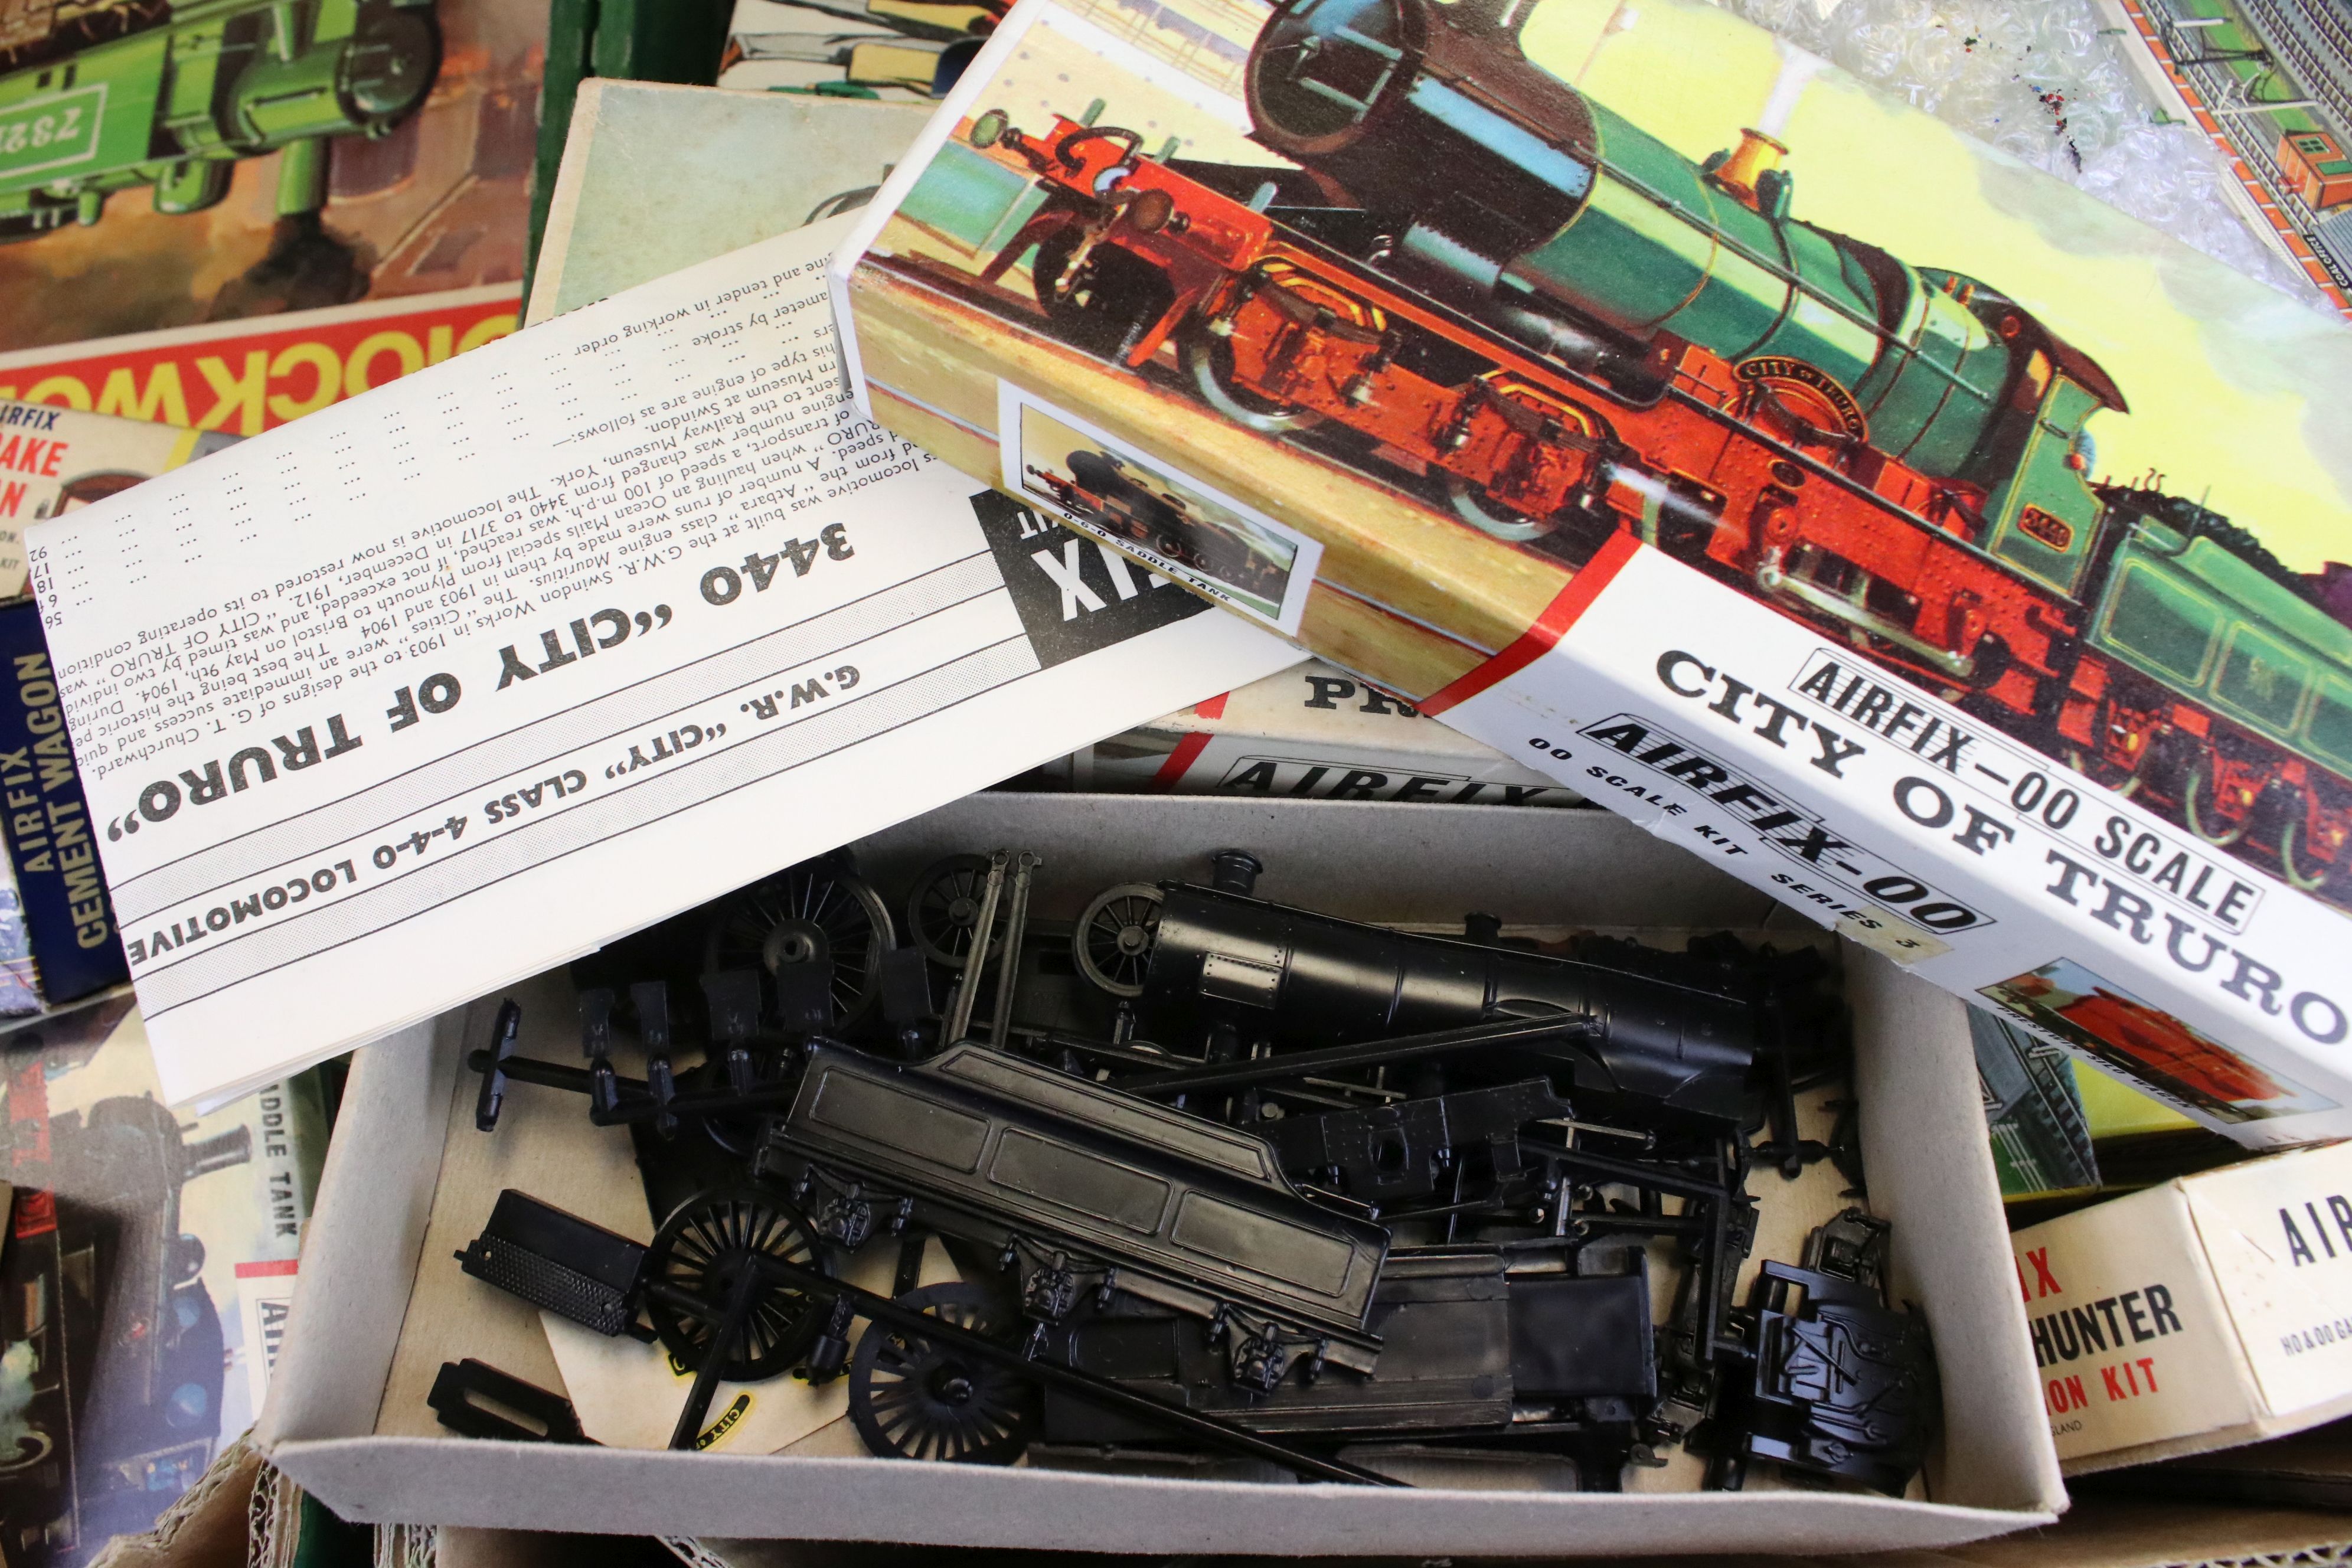 Airfix OO/HO - 44 Boxed & bagged Airfix plastic railway model kits to include 10 x locos (3 x 0-4- - Image 15 of 20